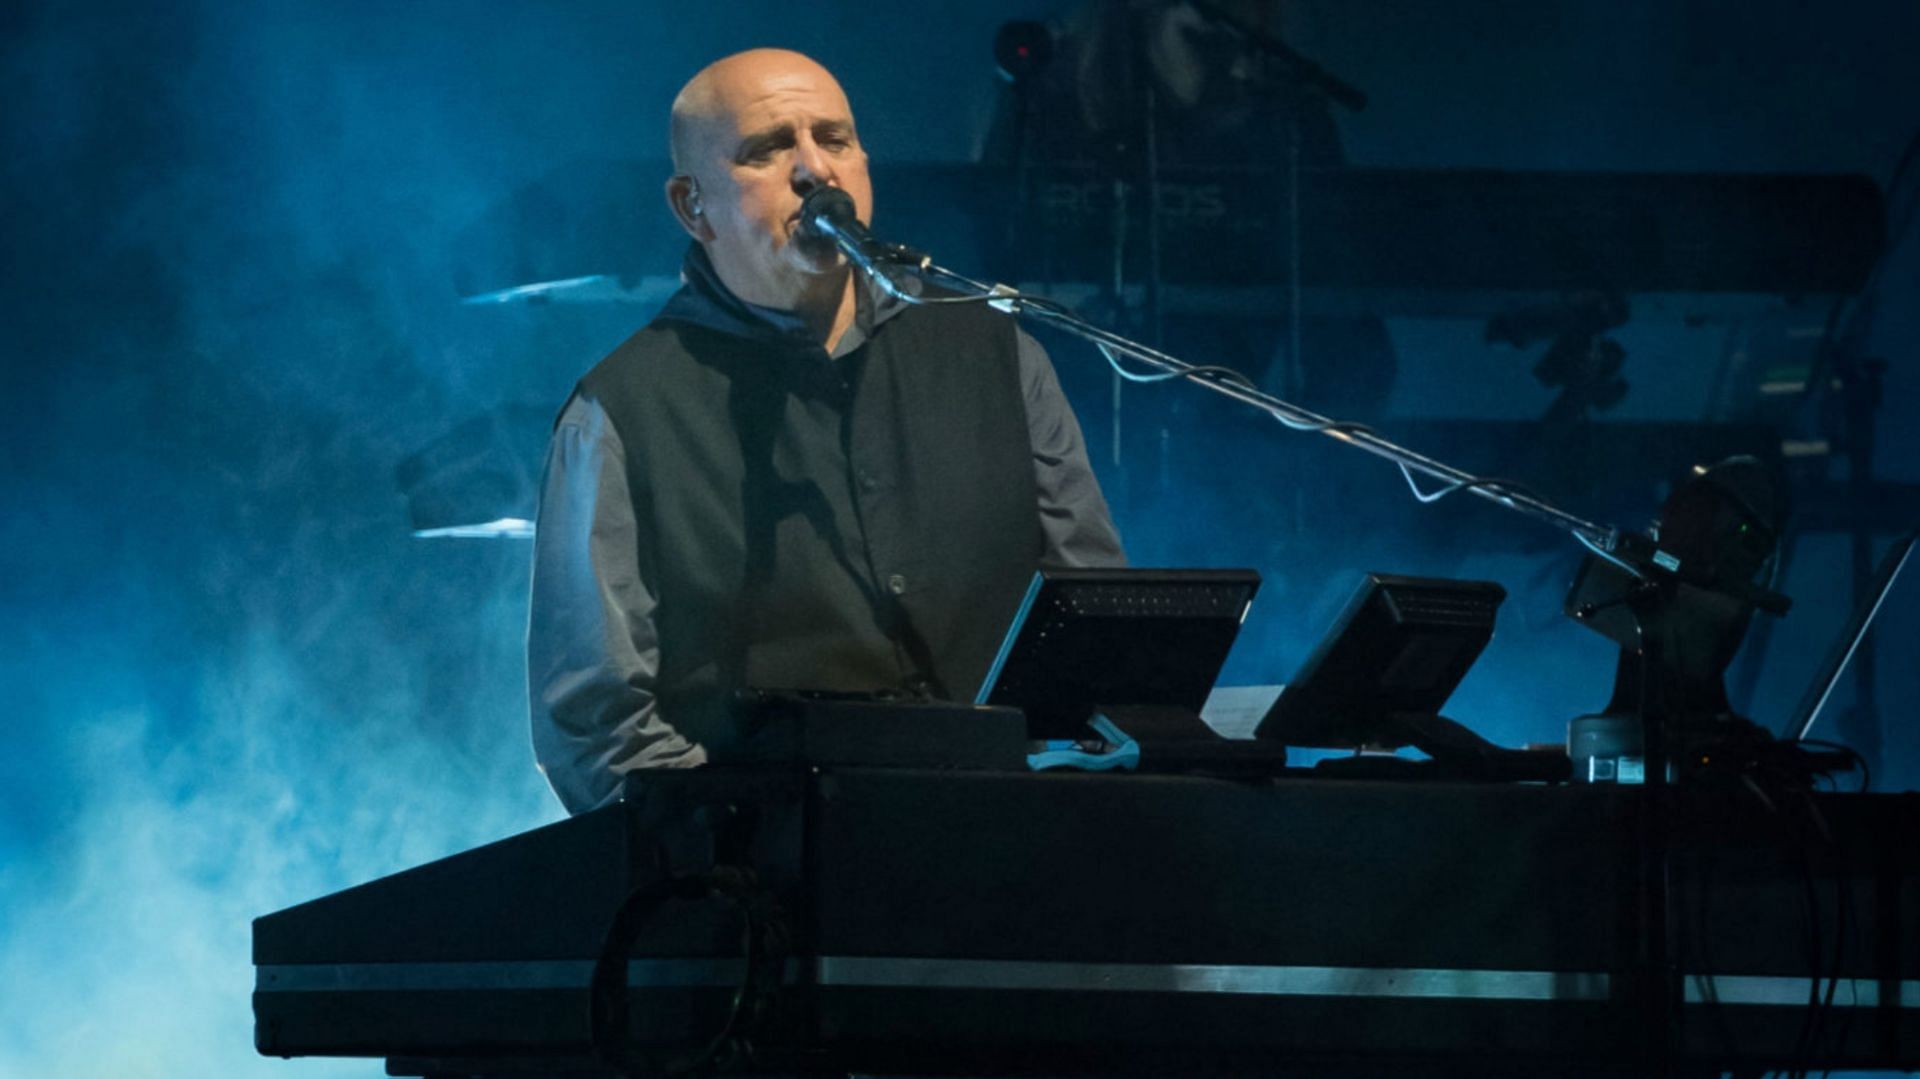 Peter Gabriel Tour 2023 Tickets, presale, where to buy, dates, and more